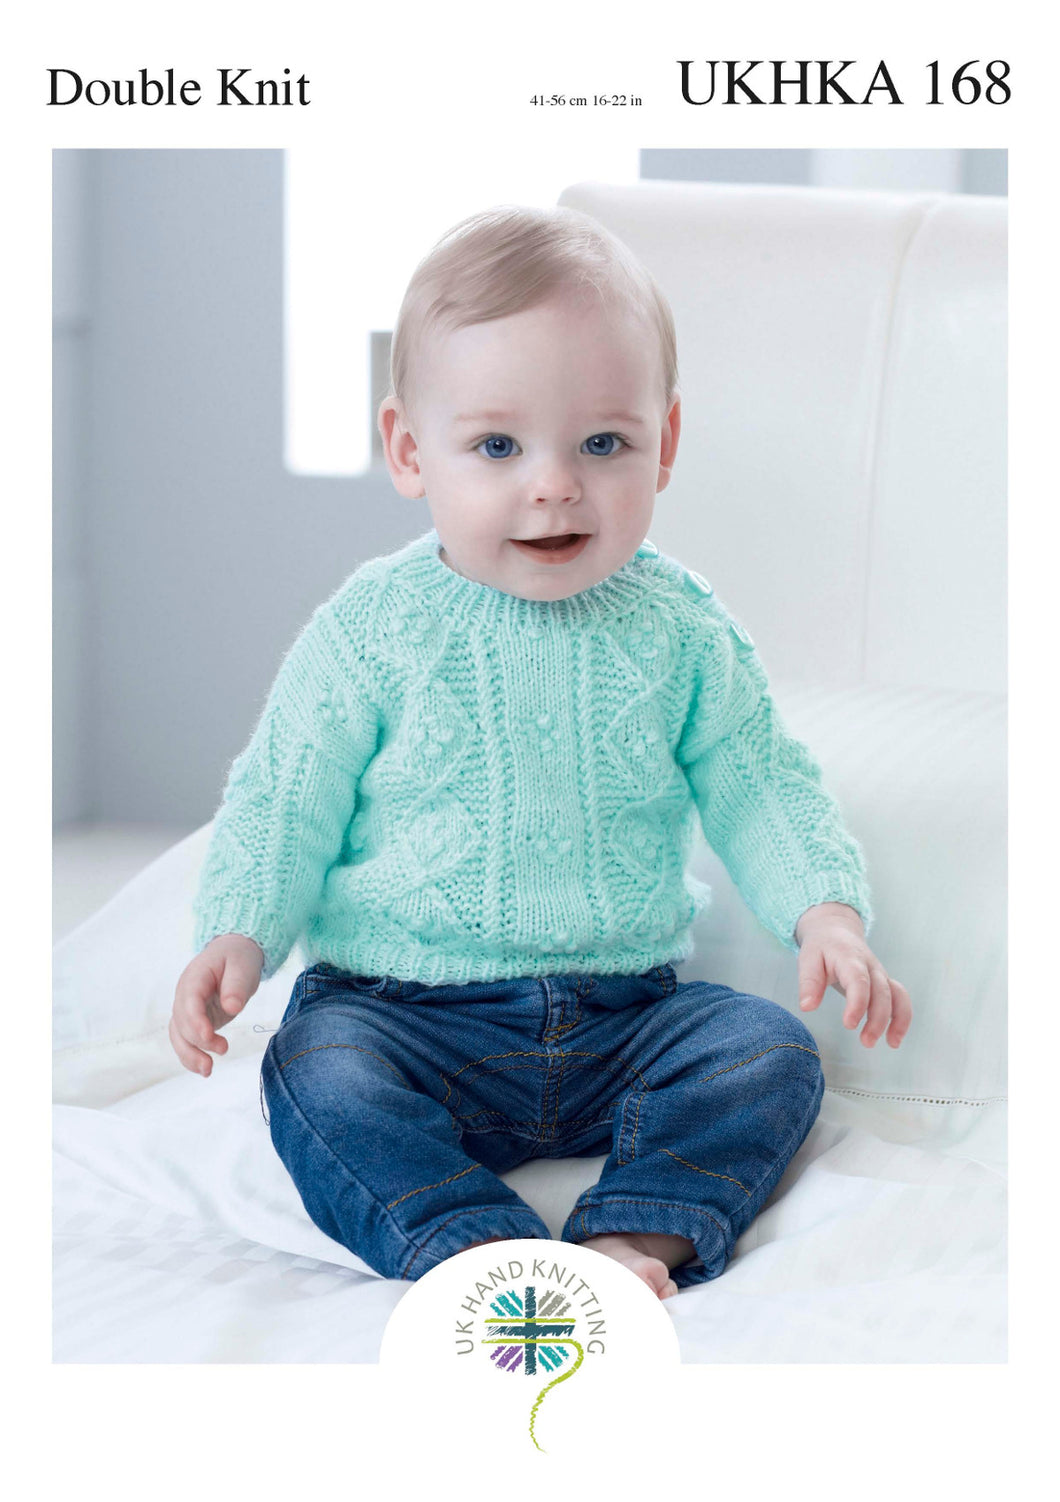 Double Knitting Pattern for Baby's Cabled Cardigan & Sweater (UKHKA 168)